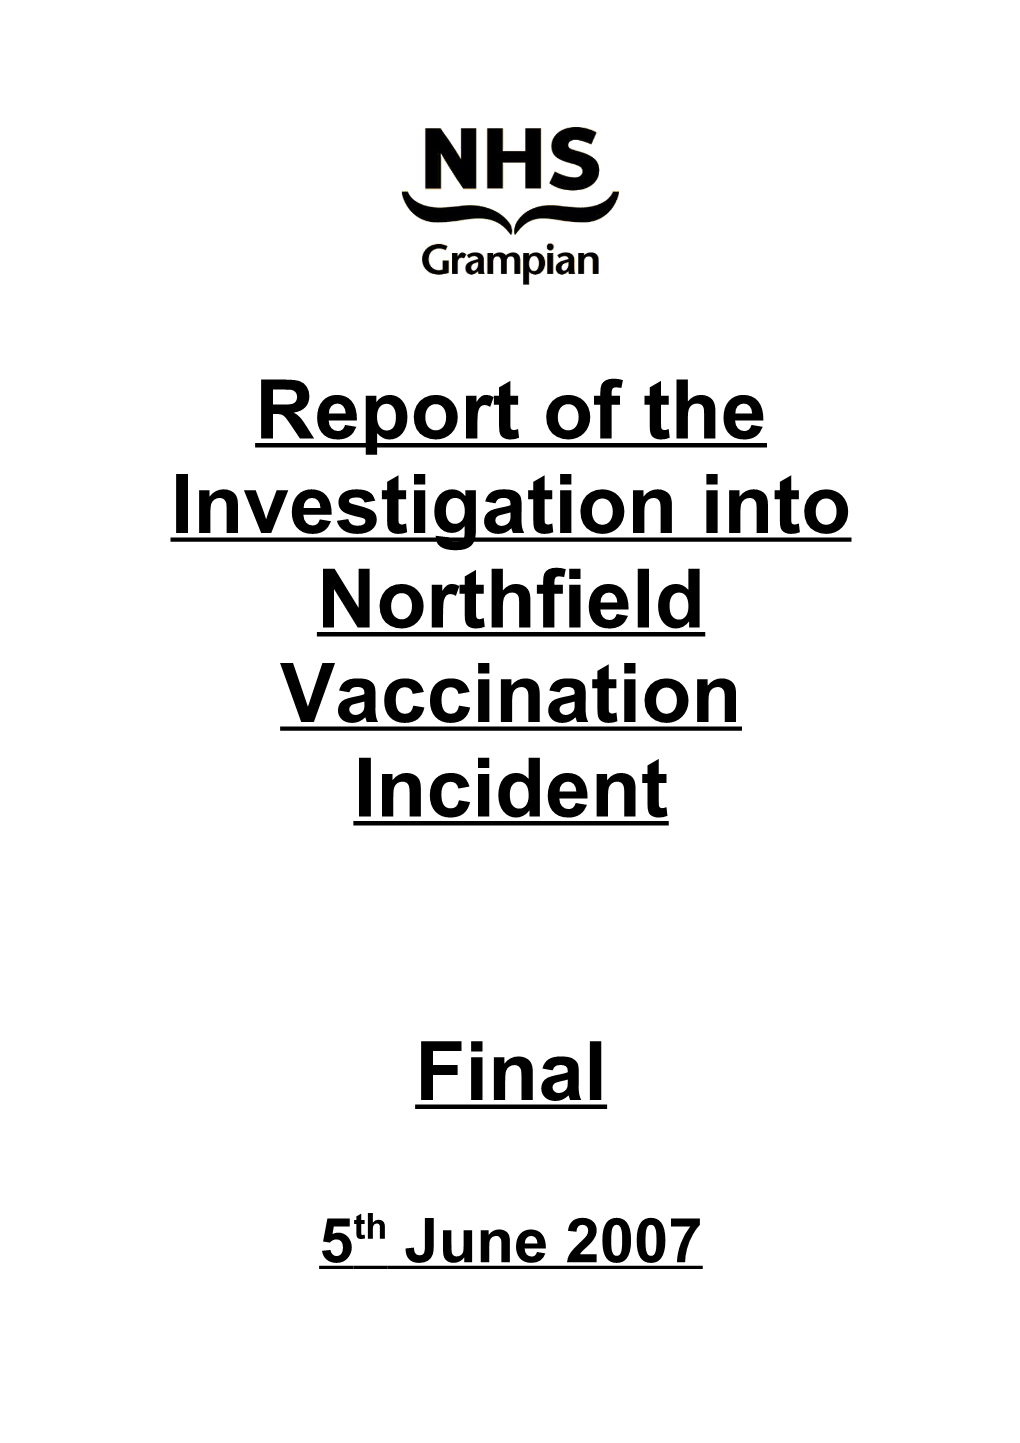 Report of the Investigation Into Northfield Vaccination Incident